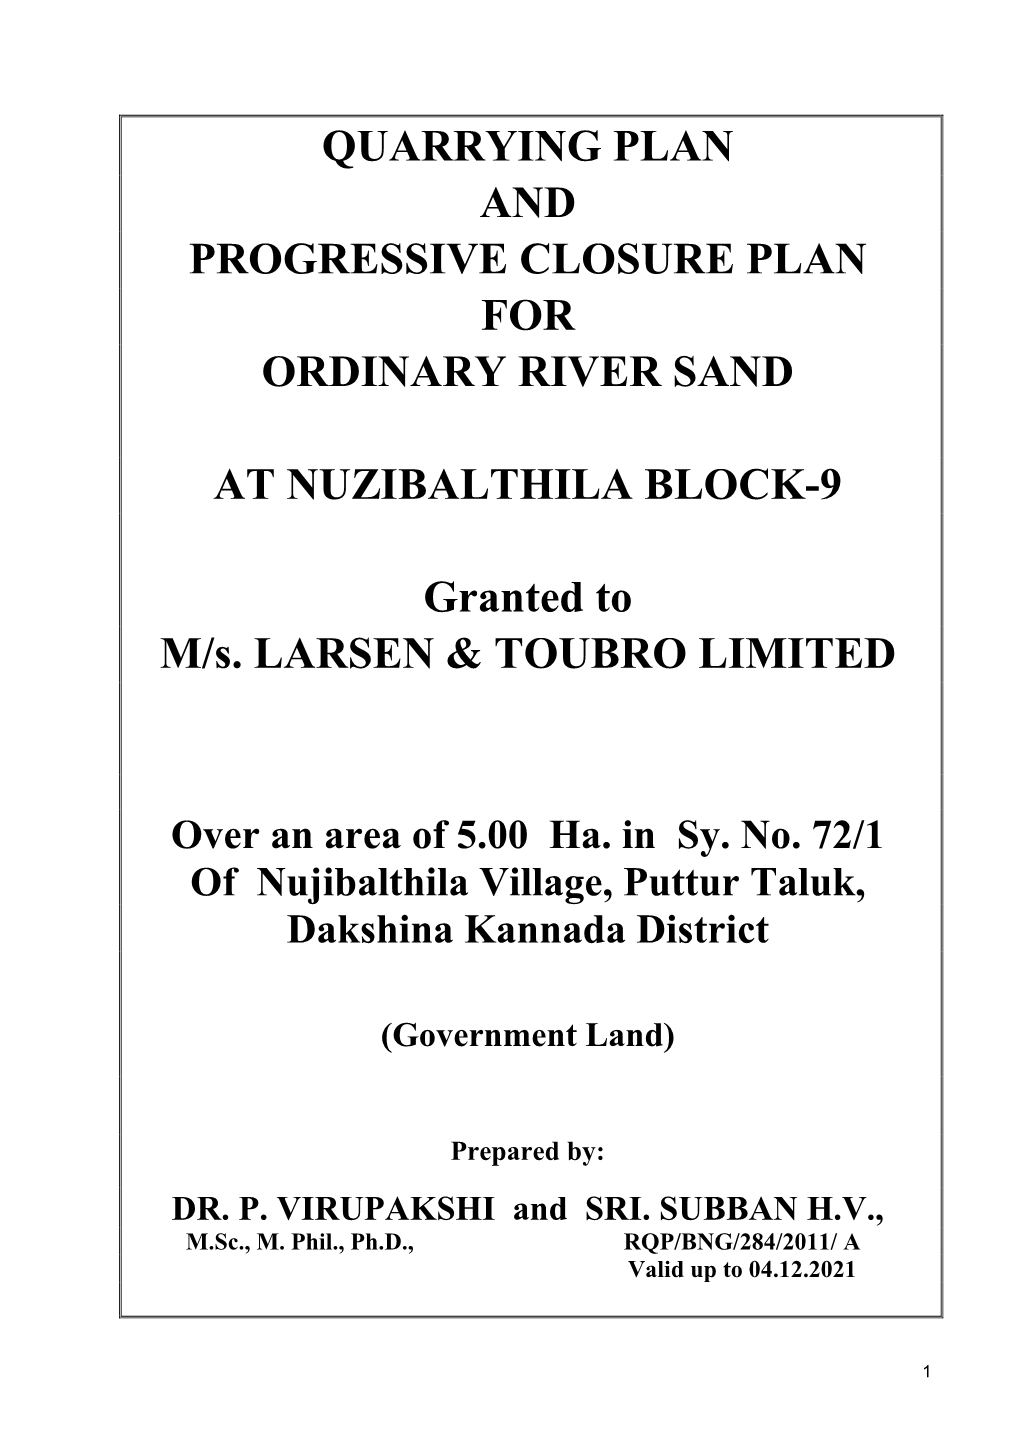 Quarrying Plan and Progressive Closure Plan for Ordinary River Sand